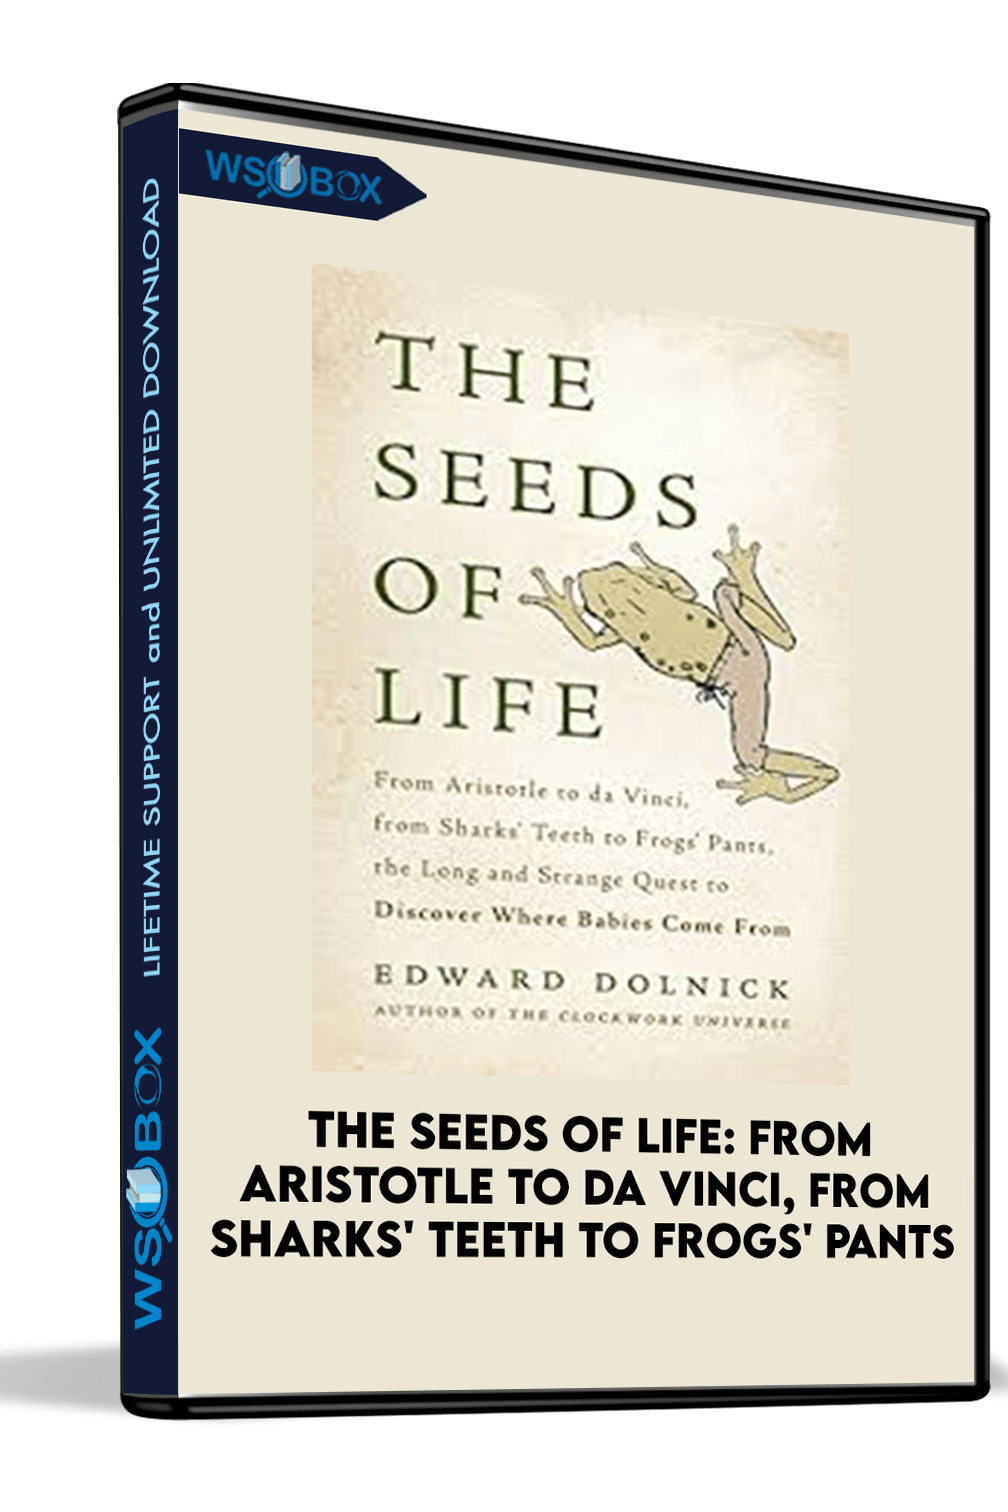 The Seeds of Life: From Aristotle to da Vinci, from Sharks’ Teeth to Frogs’ Pants